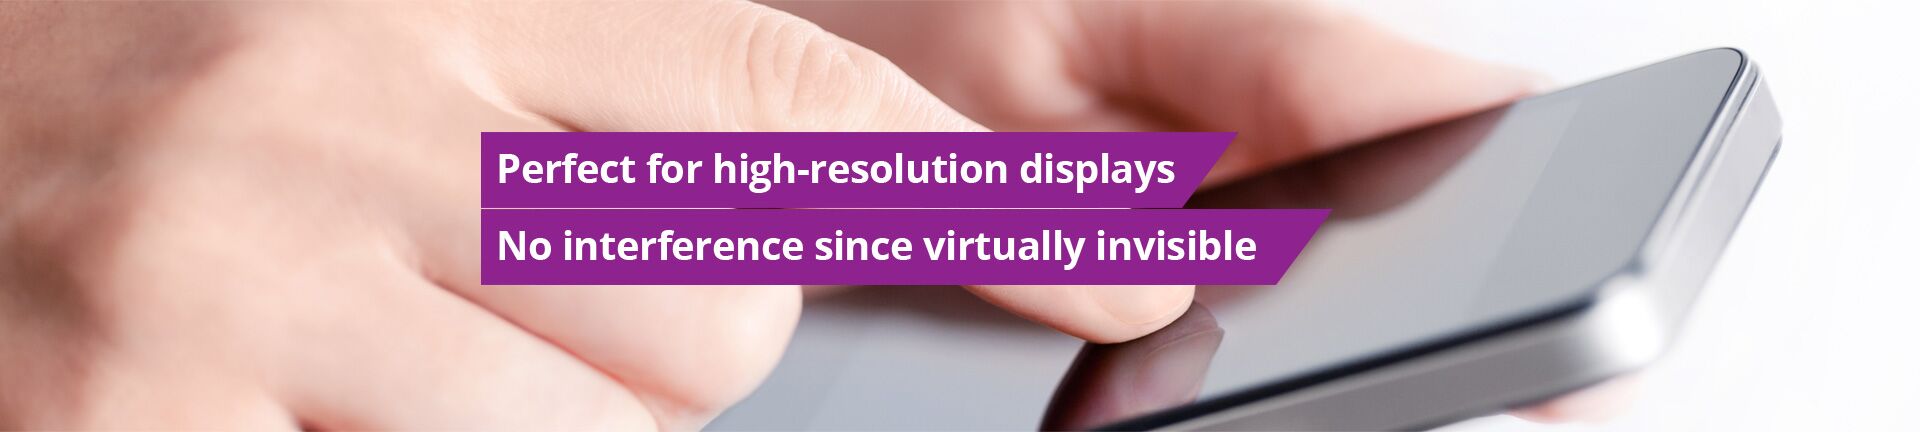 dipos Crystalclear for high-resolution displays.